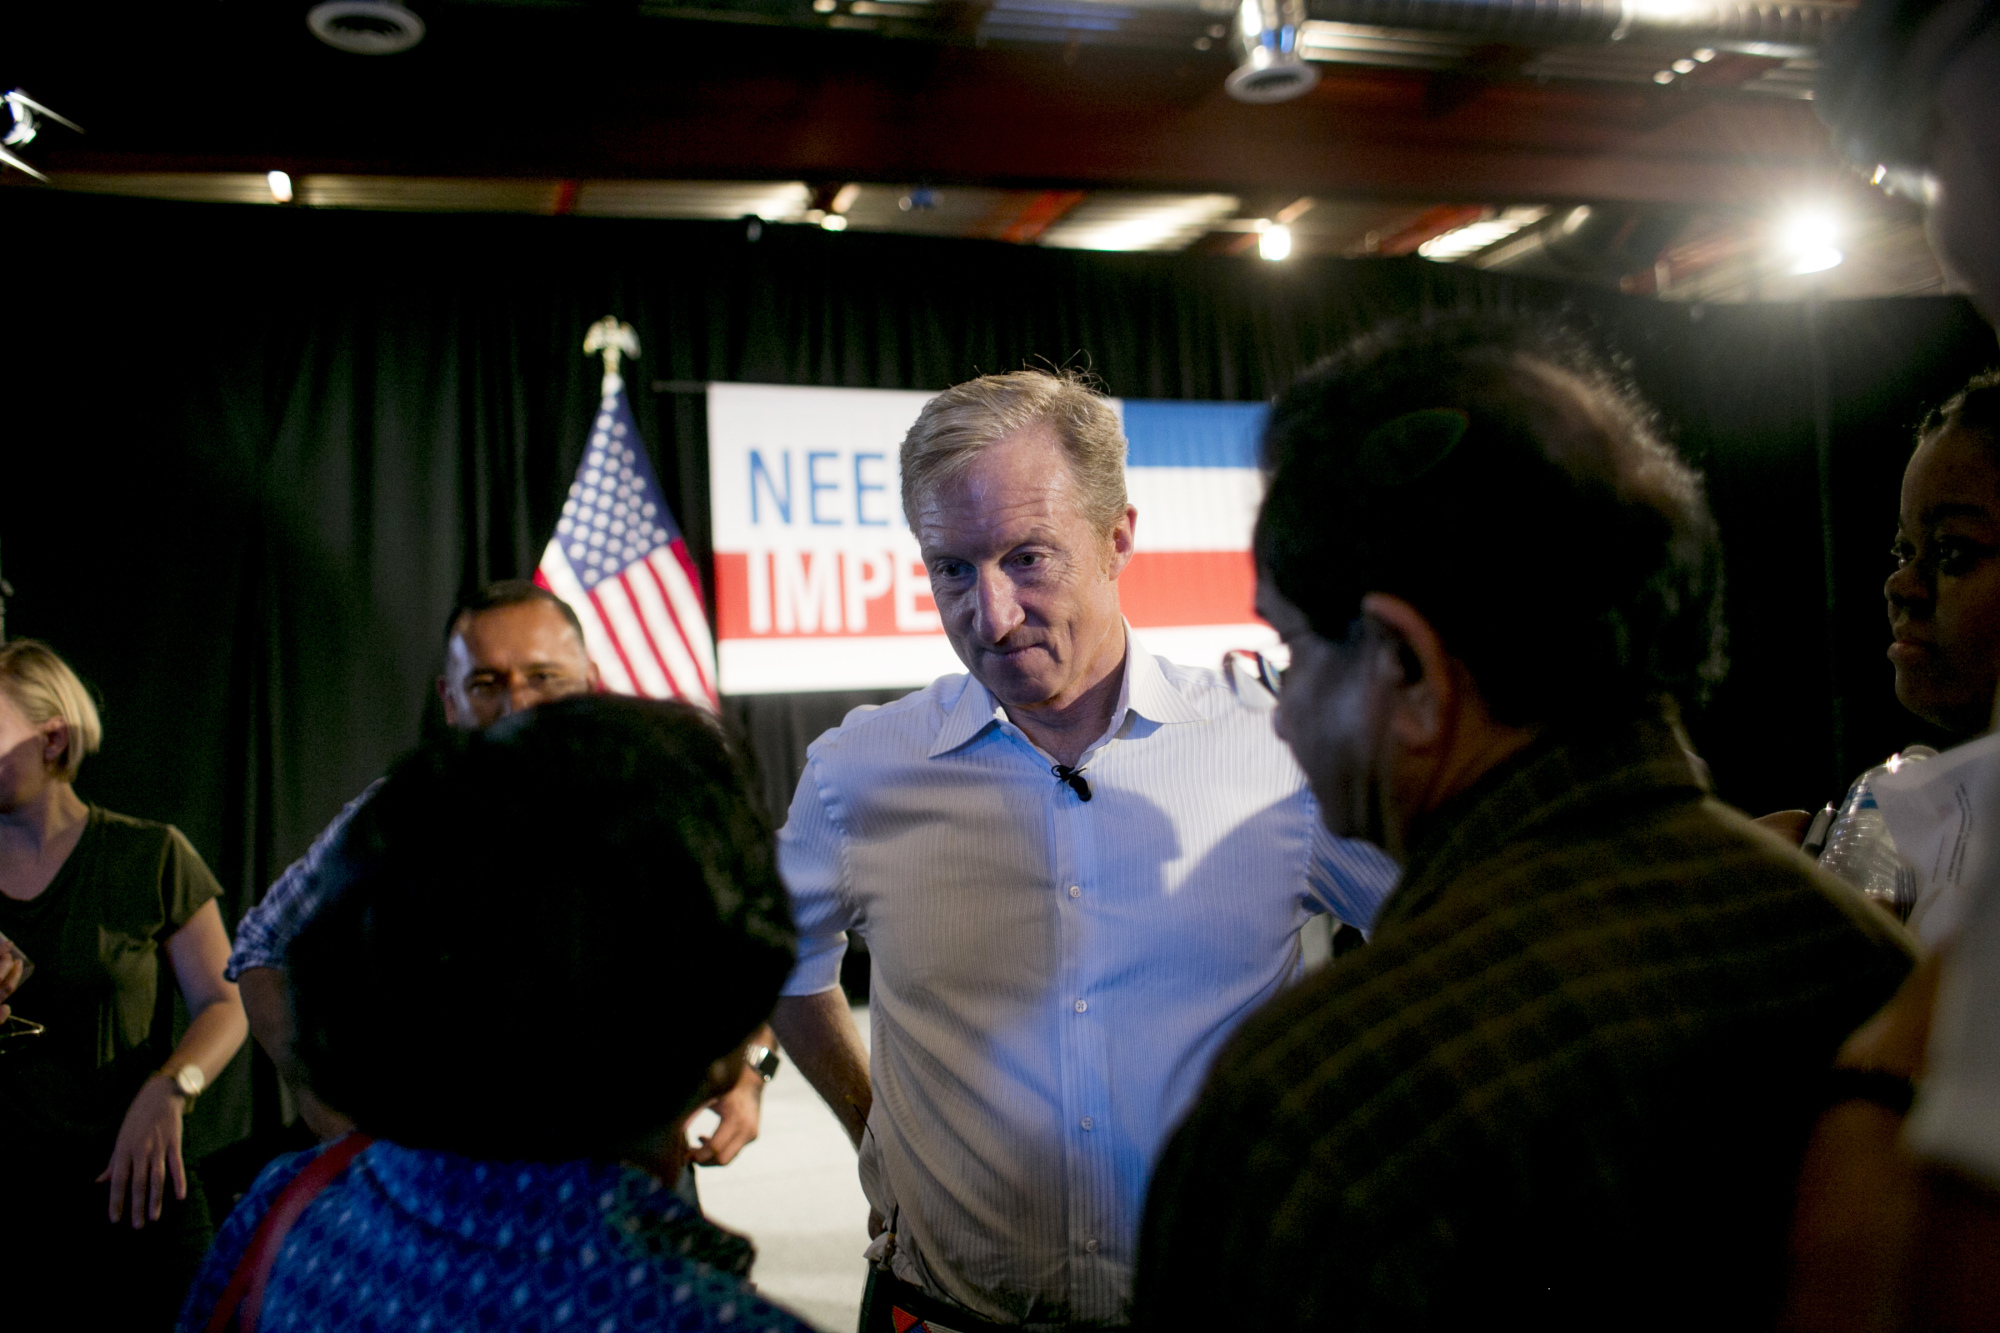 Tom Steyer listens to attendees during a &quot;Need To Impeach&quot; event in Detroit on Aug. 13, 2018.